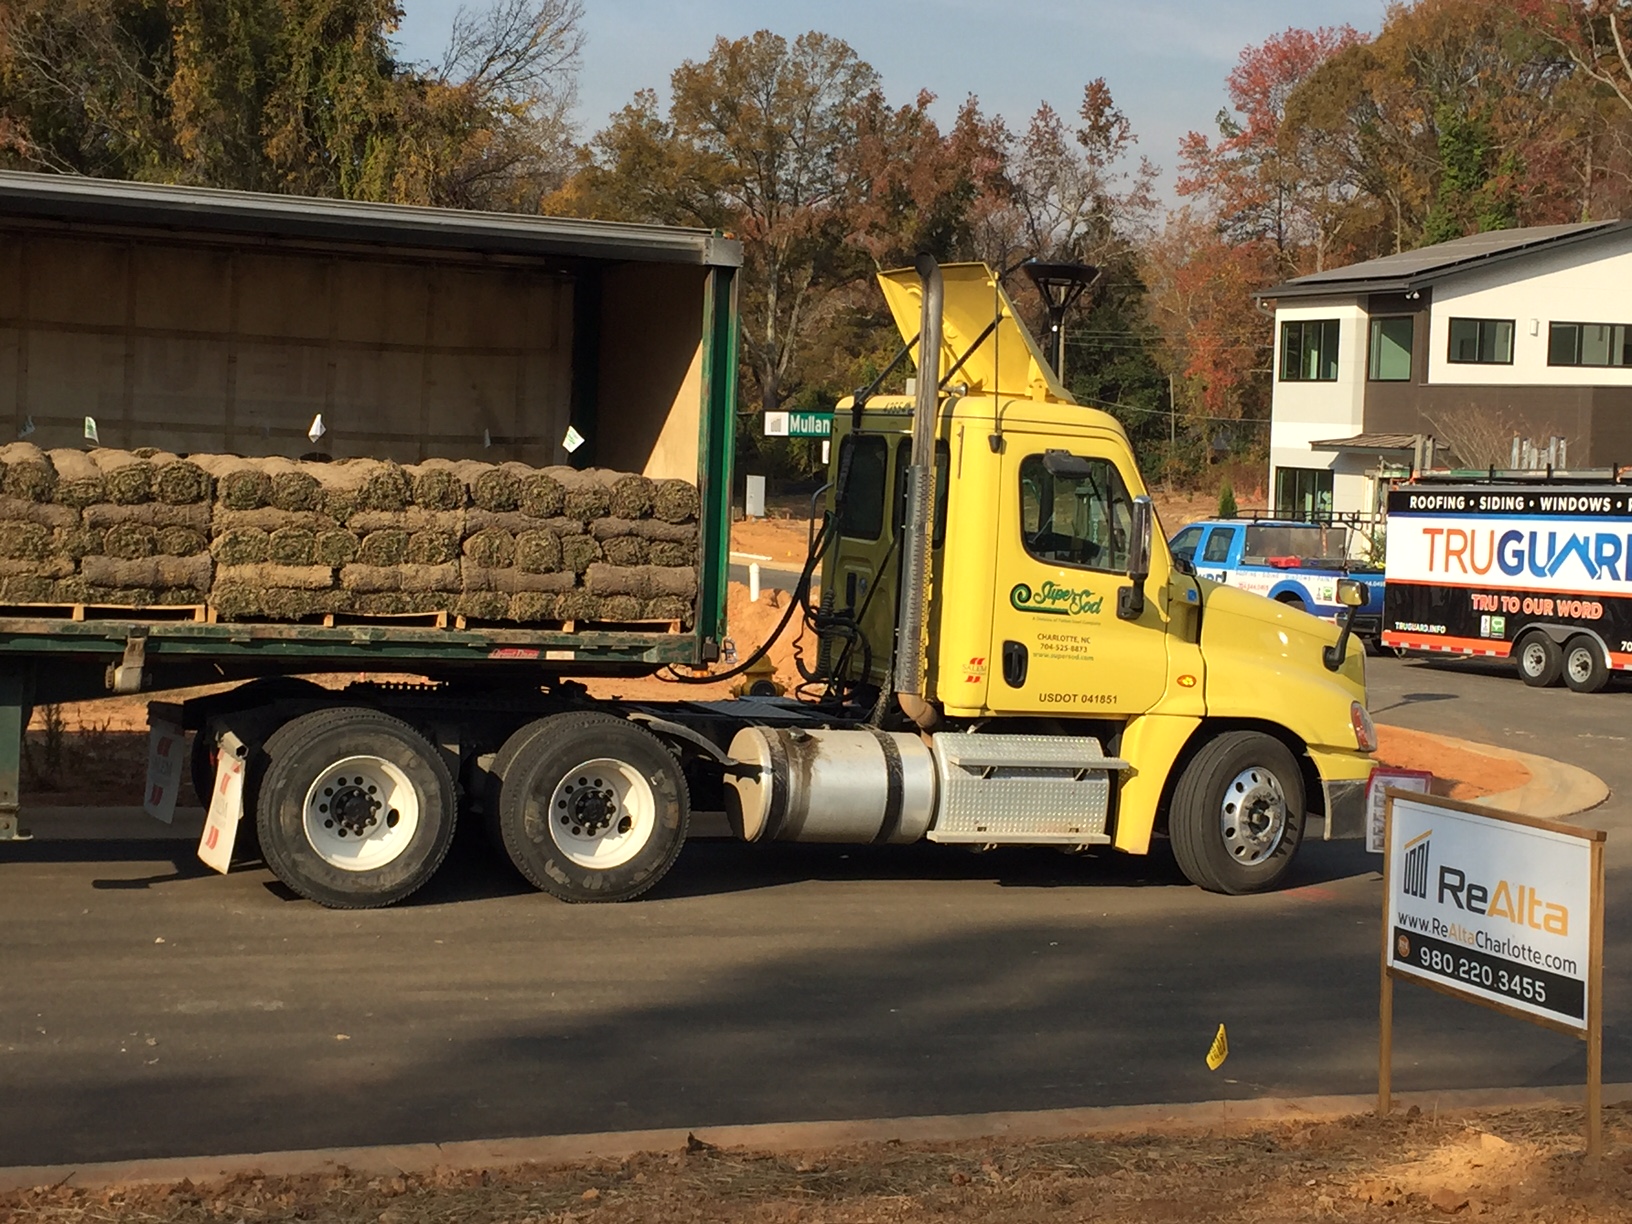 Super-Sod delivers the first load of TifTuf Bermudagrass to ReAlta solar community.